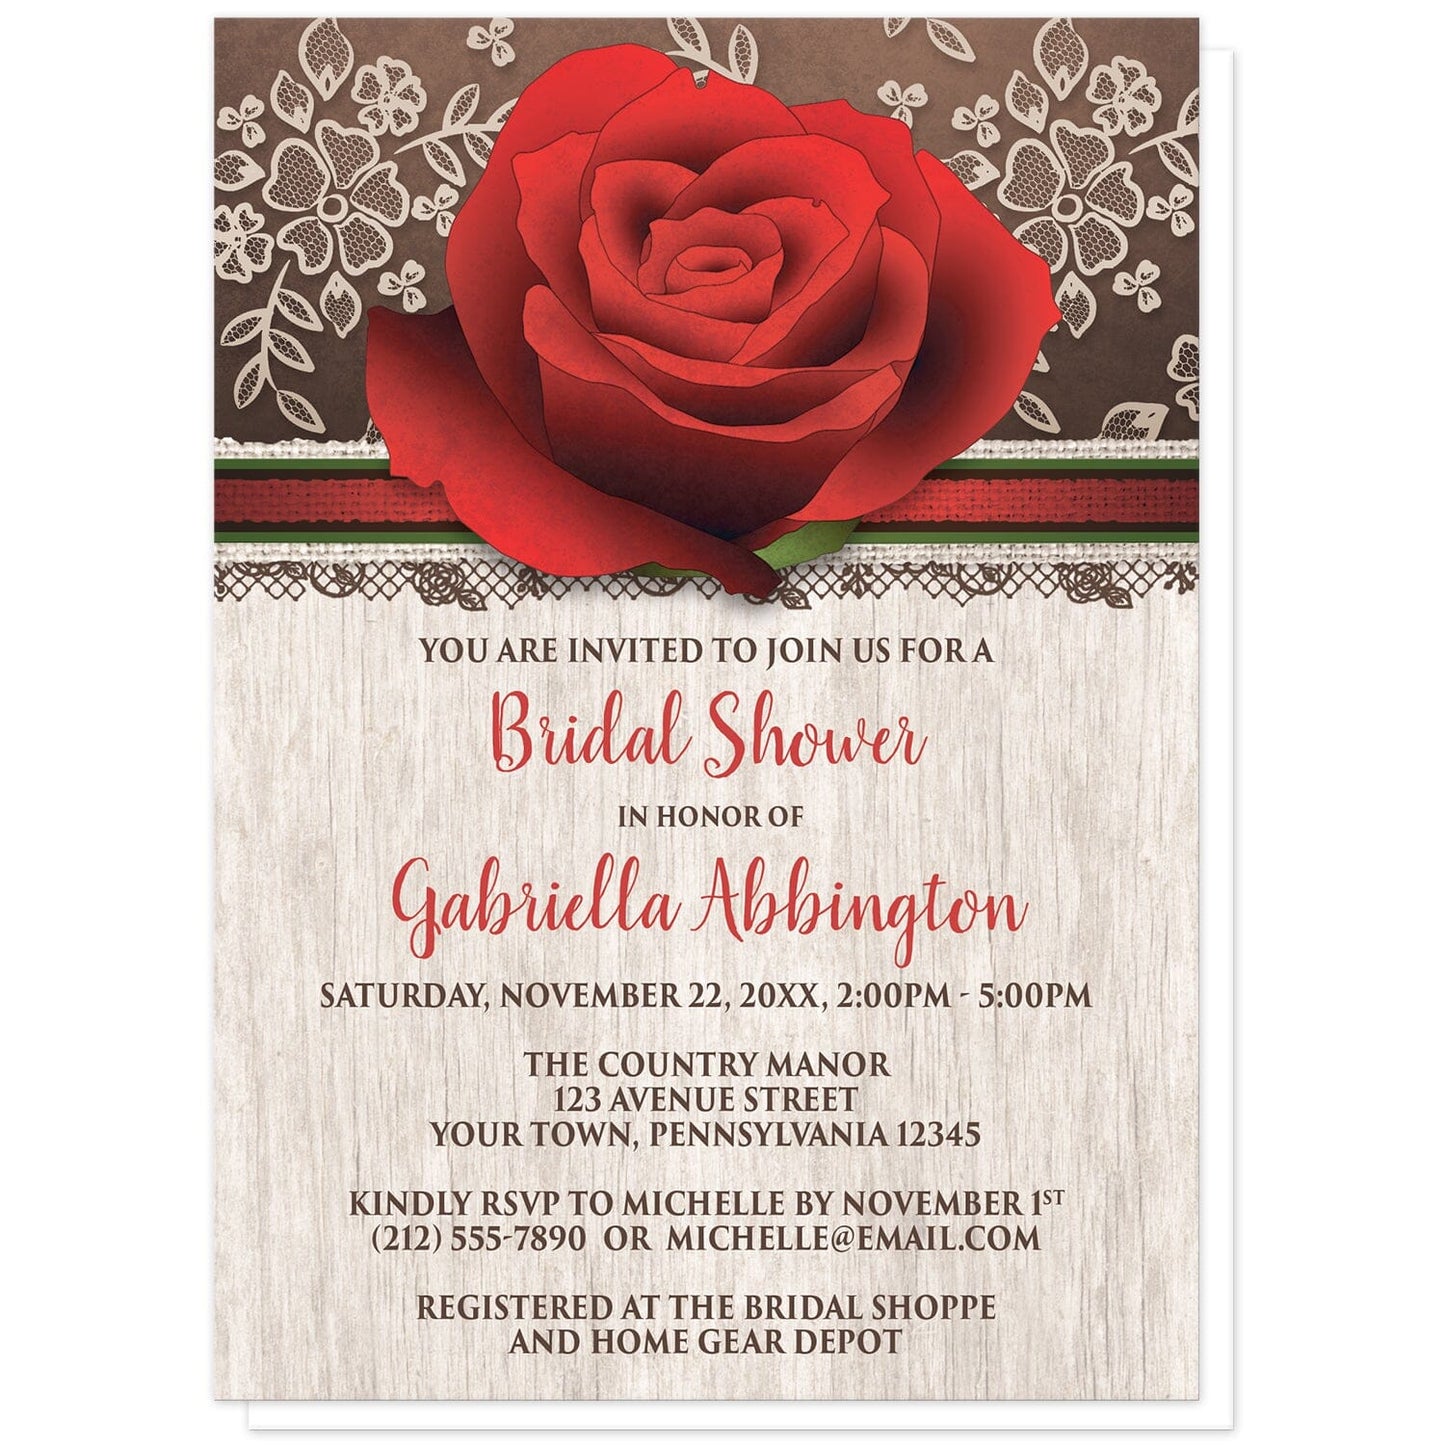 Rustic Wood Lace Red Rose Bridal Shower Invitations at Artistically Invited. Beautiful rustic wood lace red rose bridal shower invitations with a lovely large red rose illustration over a rich brown background with a cream lace design at the top of the invitations. Your personalized bridal shower celebration details are custom printed in red and brown over a light wood pattern background below the red rose. 